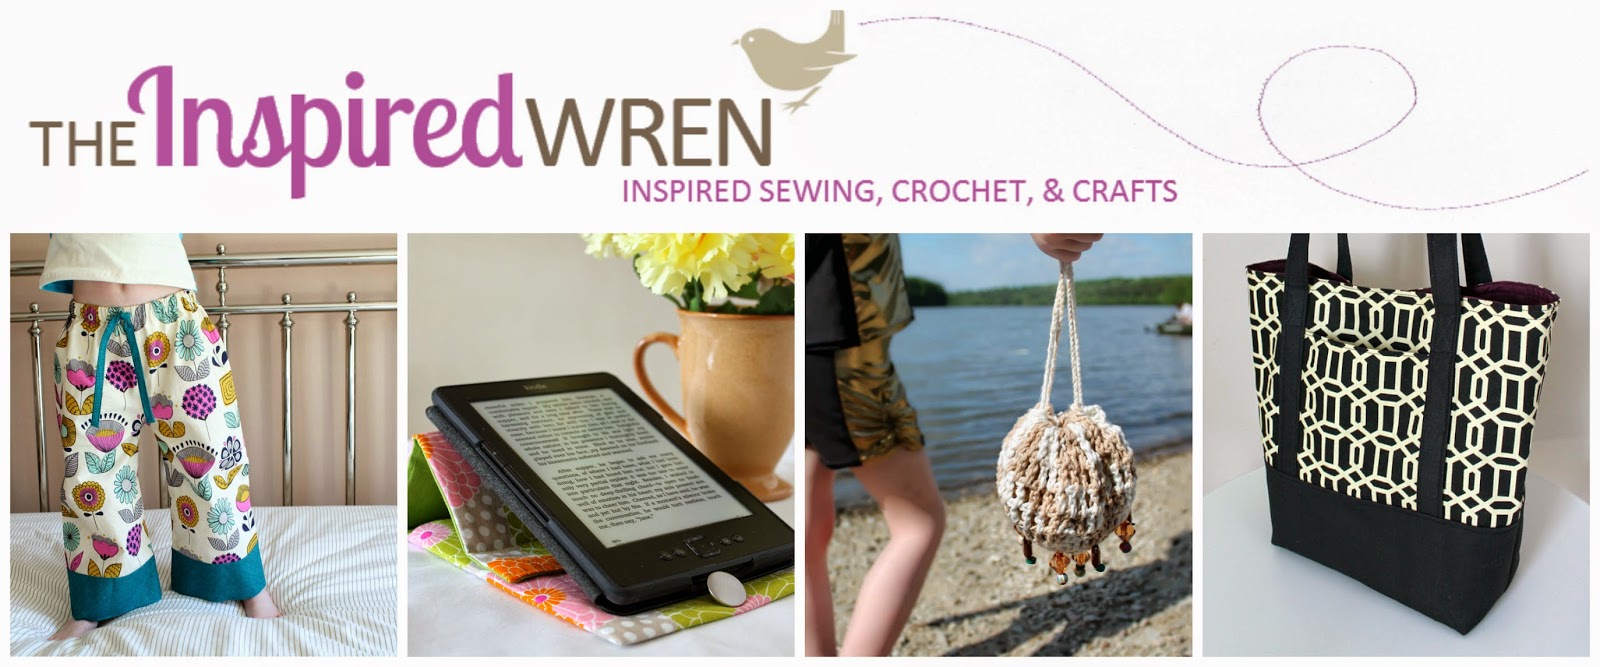 The Inspired Wren | Inspired sewing, crochet, & crafts.